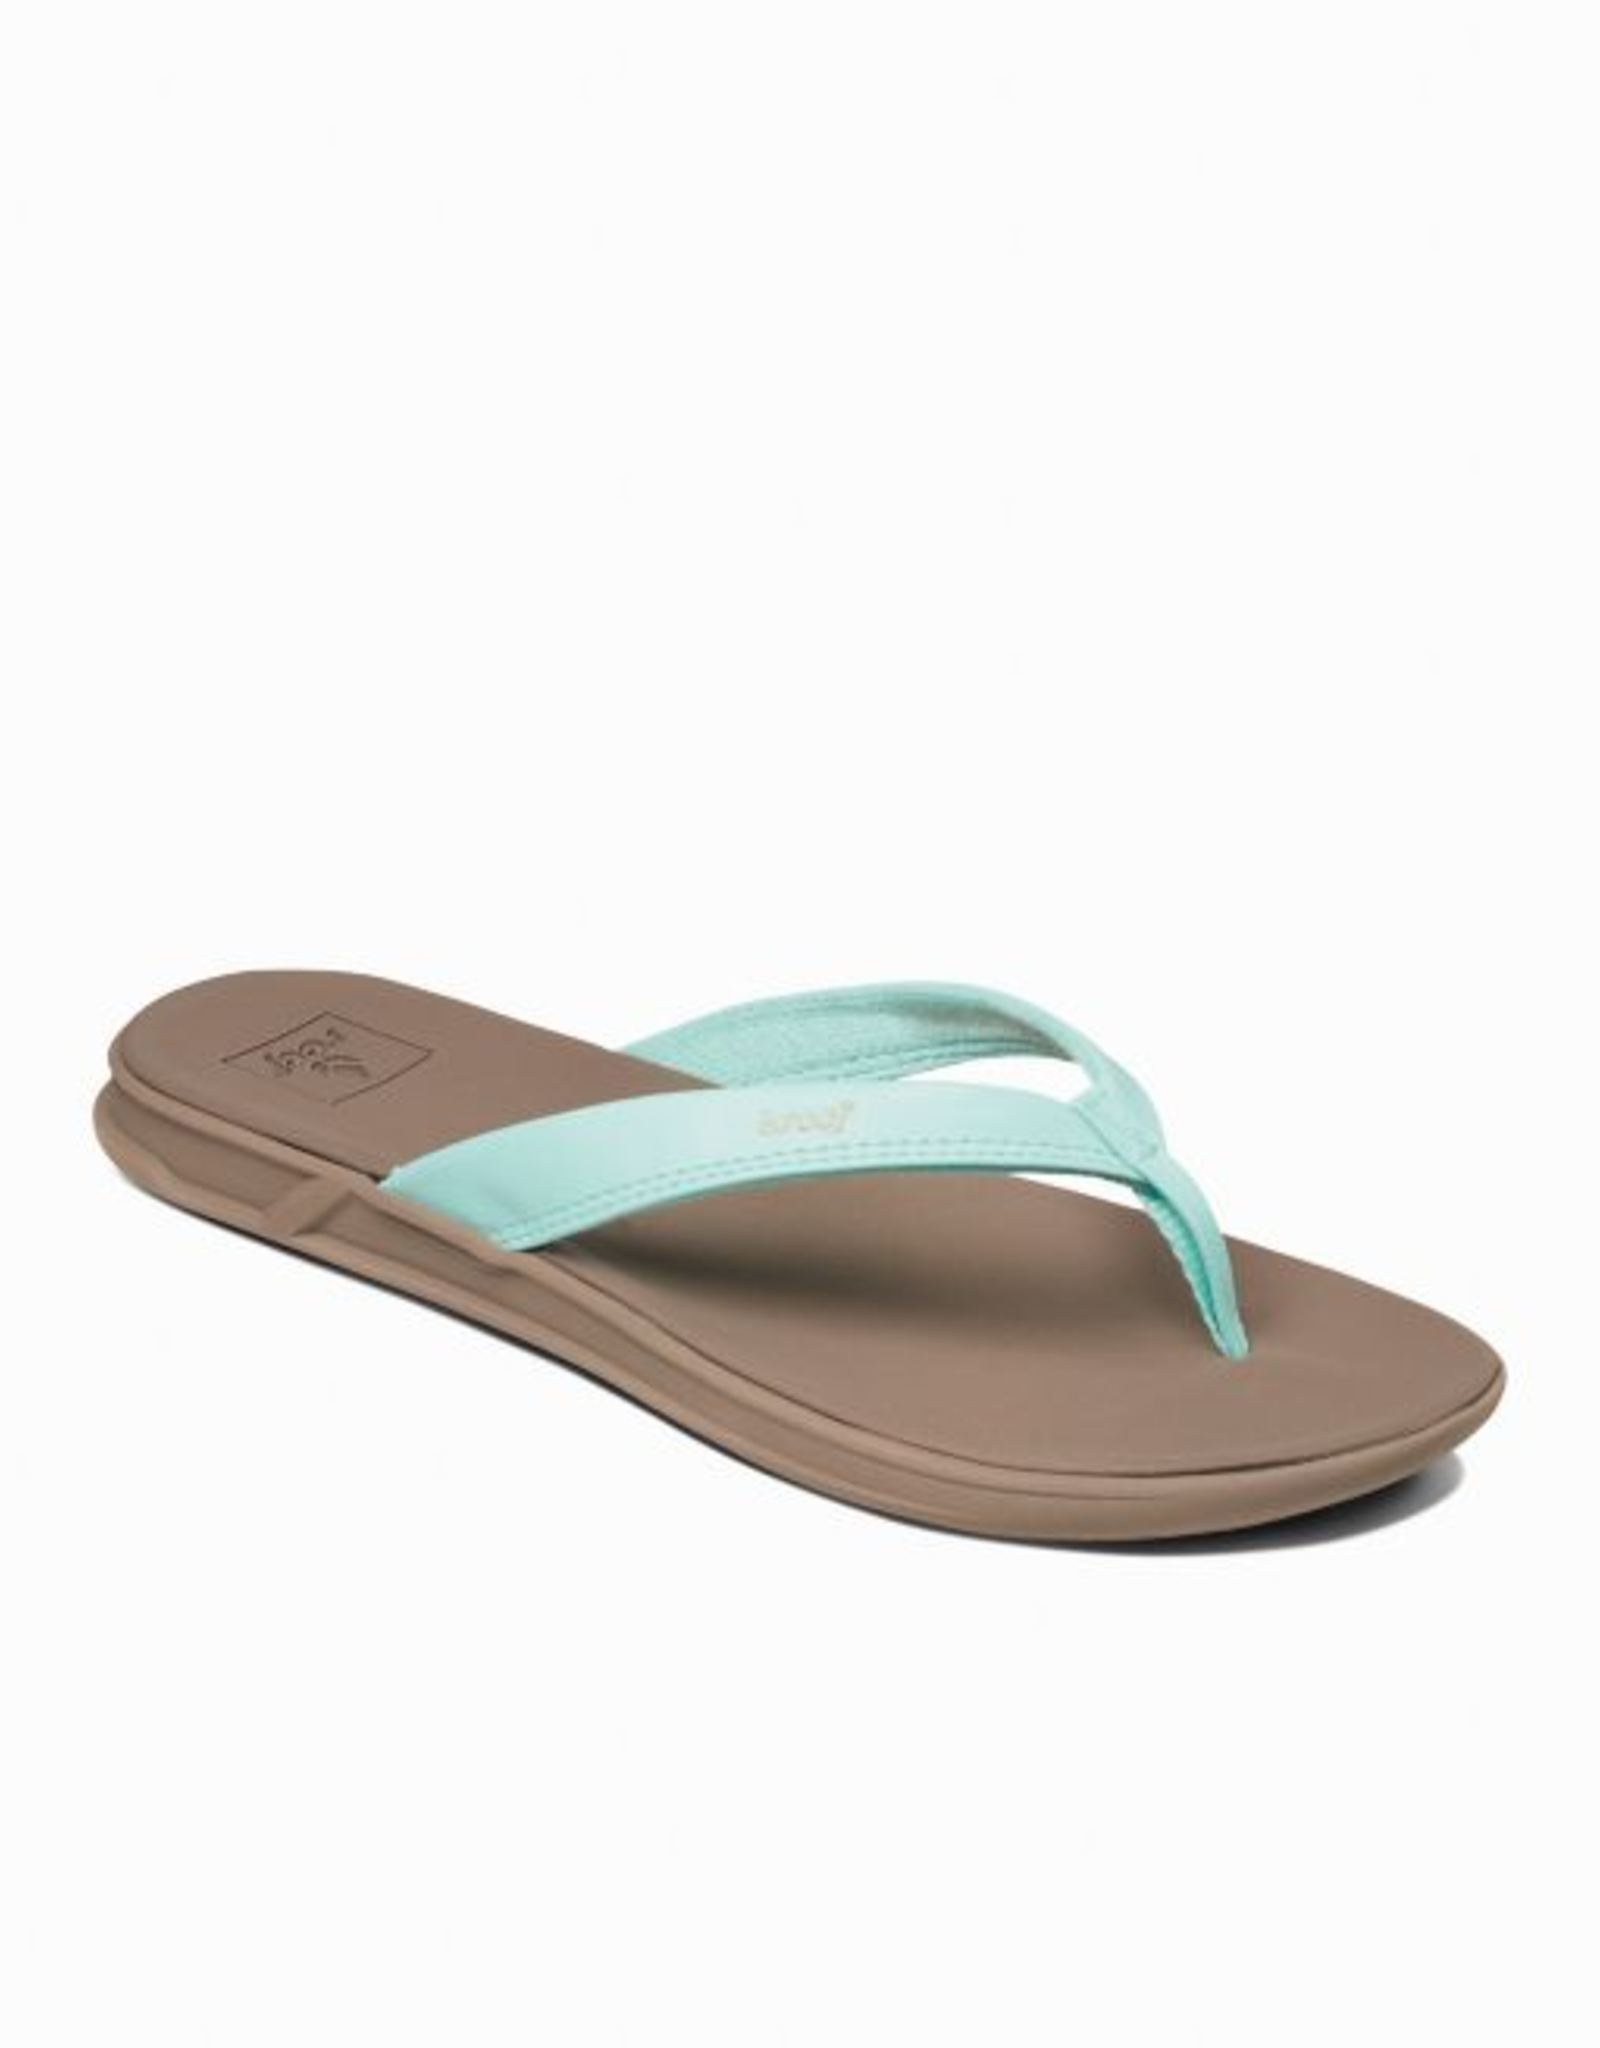 Reef Reef - Wmns ROVER CATCH Sandal - Mint -